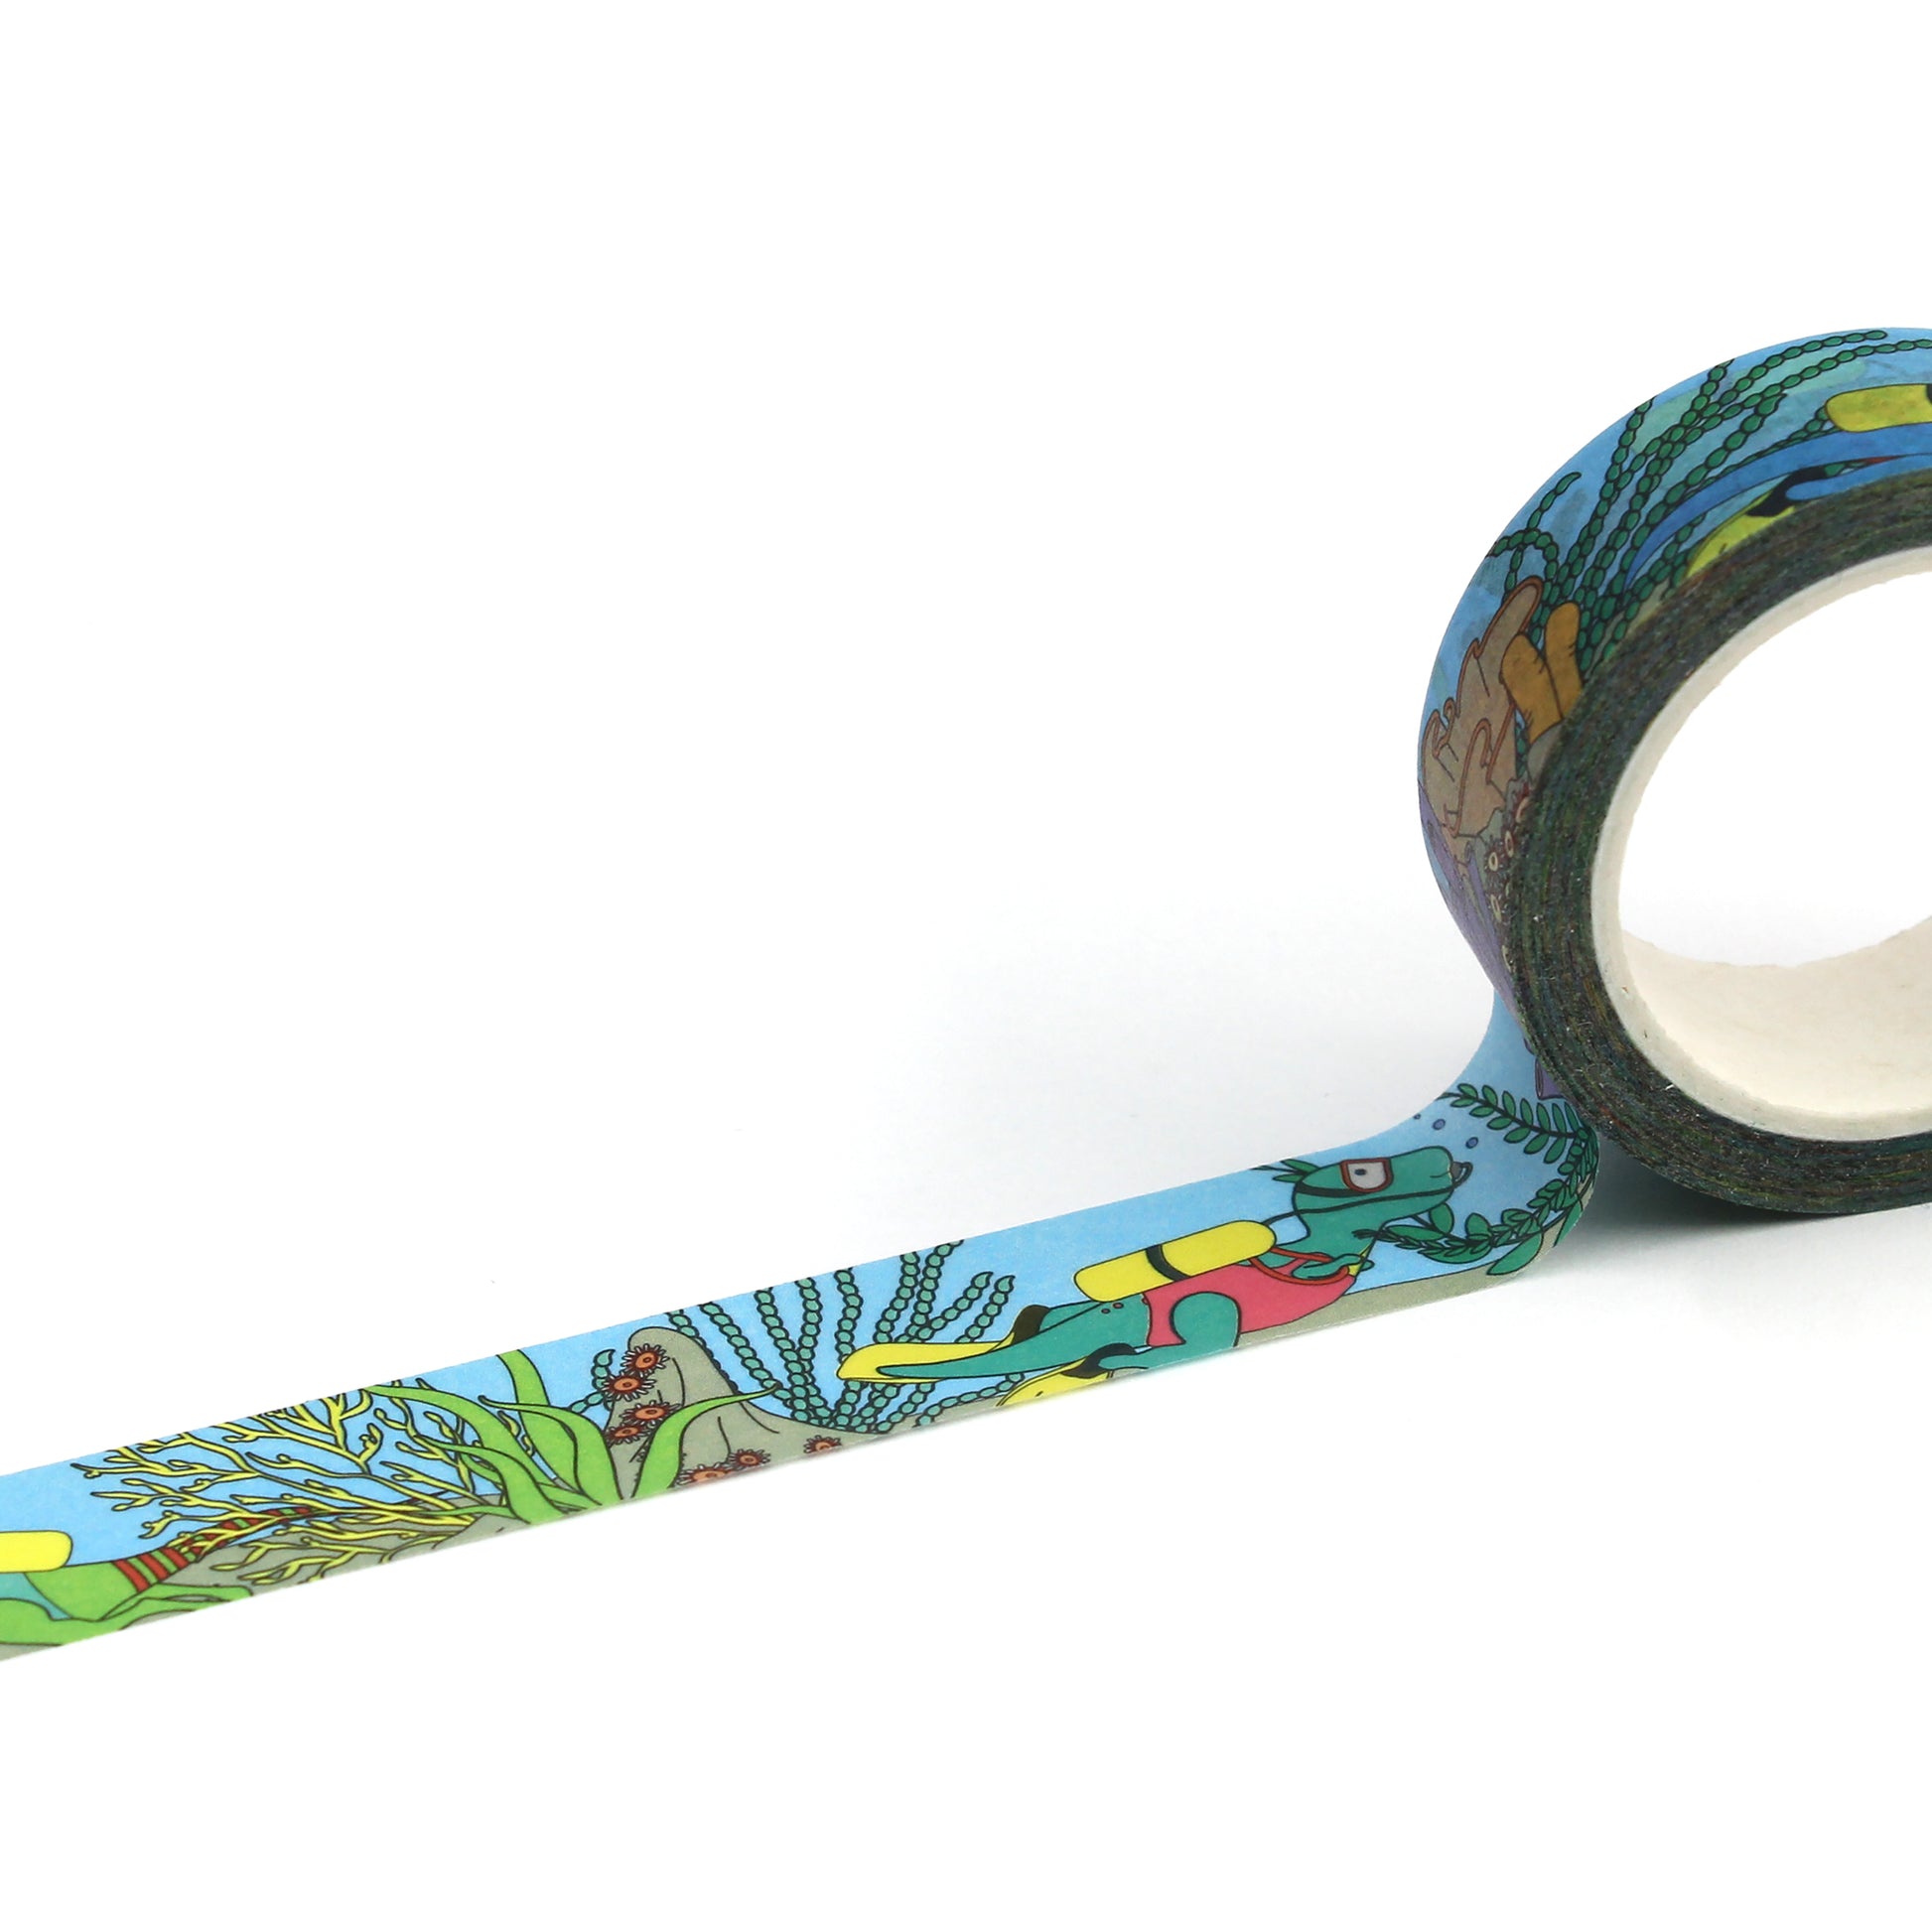 A roll of of under the sea dinosaur washi tape rolled out